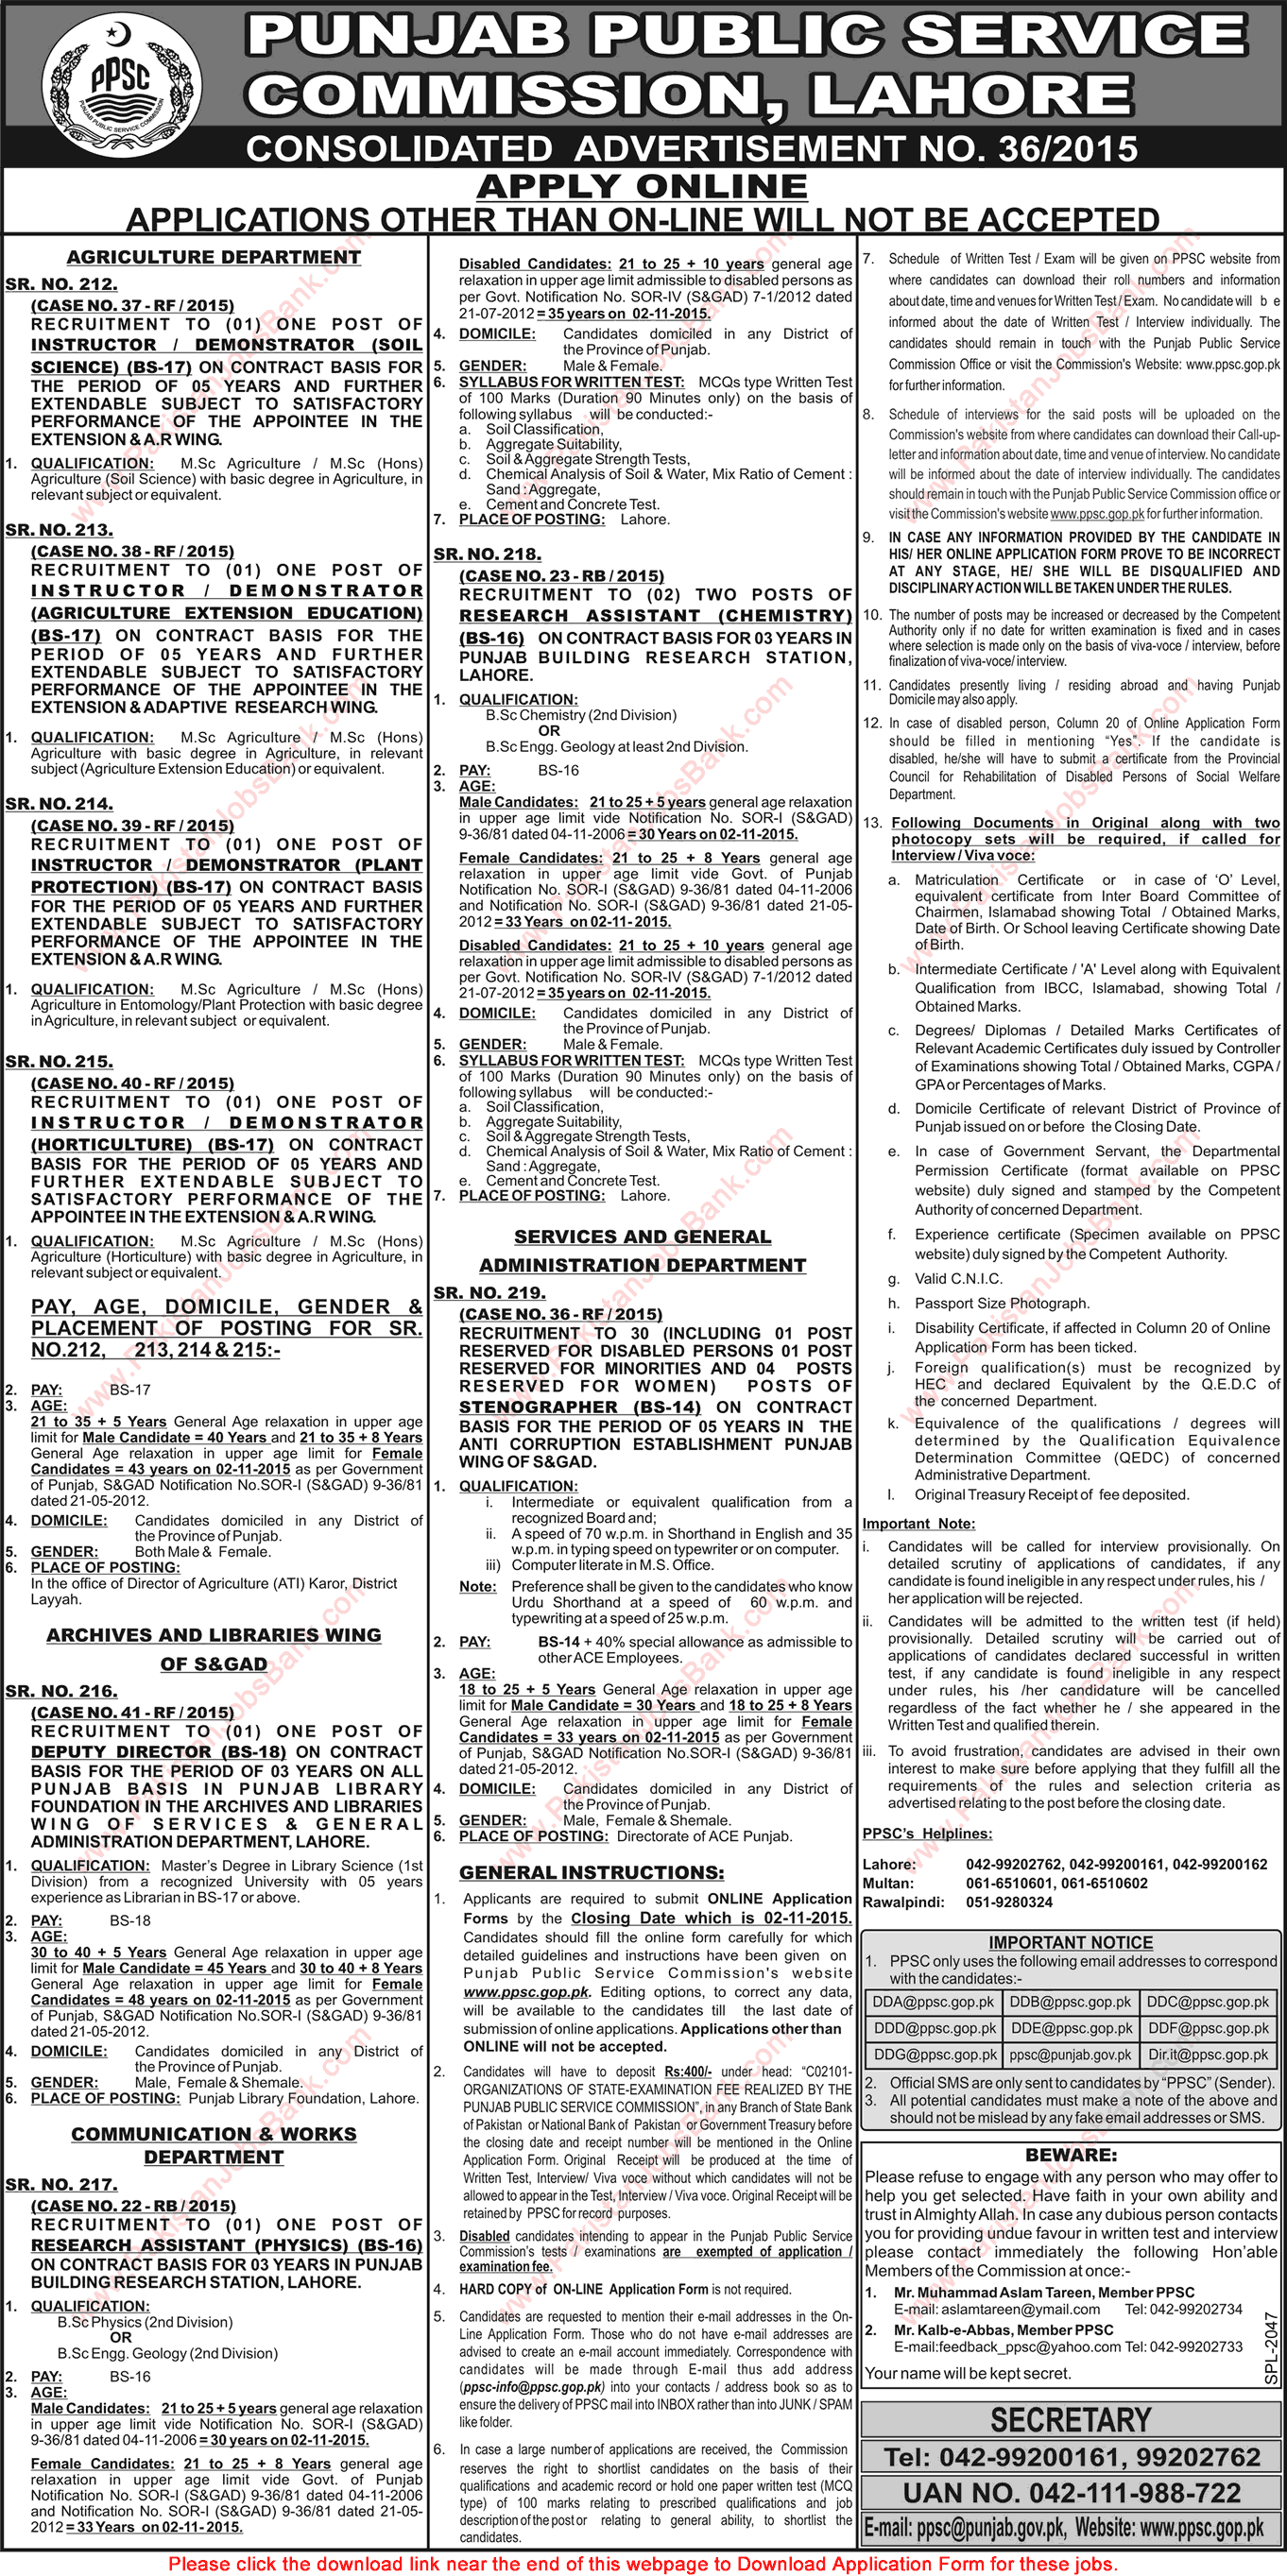 PPSC Jobs October 2015 Online Application Form Consolidated Advertisement No 36/2015 Latest